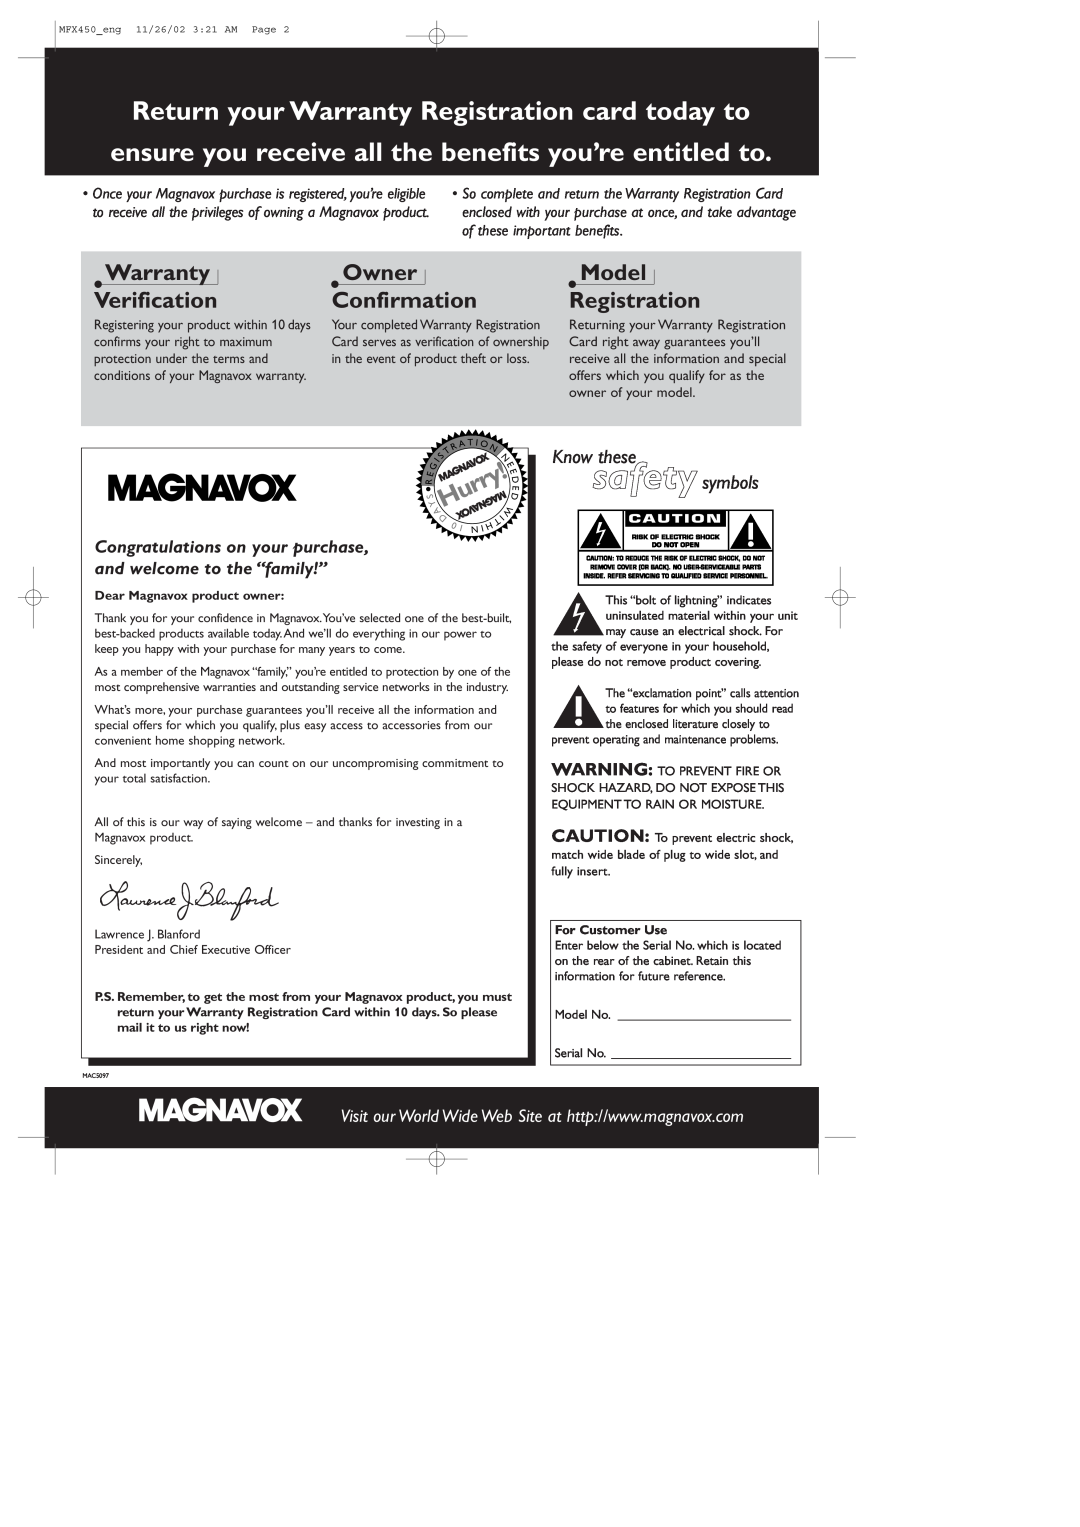 Magnavox MSW 990/17, MCS 990/17, MMX450/17 manual Warranty Verification, Owner Confirmation, Model Registration, Hurry 